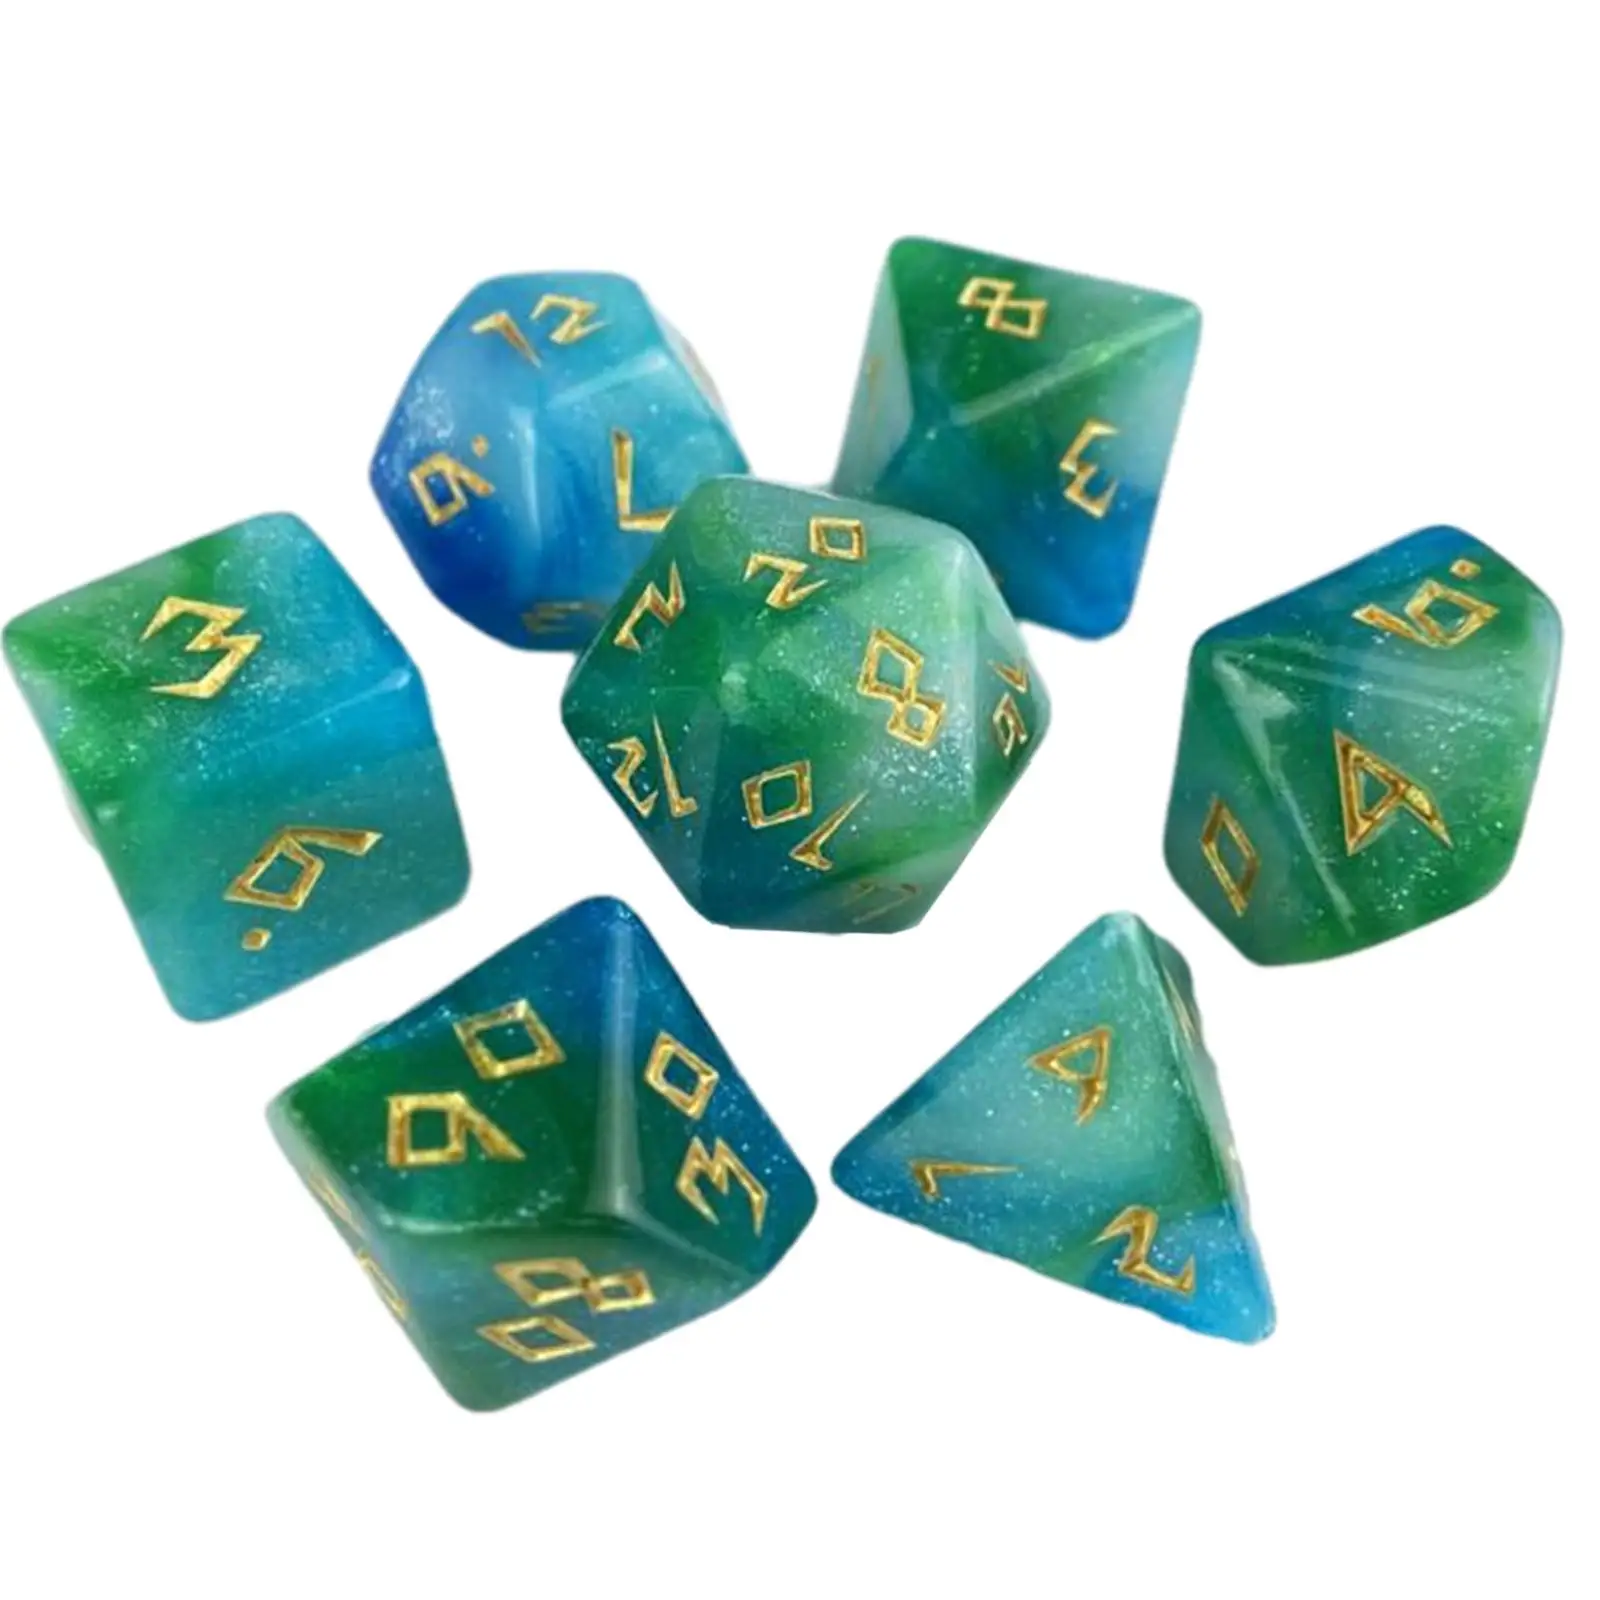 7x Multi Sided Game Dices Acrylic Game Dices Set for KTV Party Table Game Role Playing Game Board Game